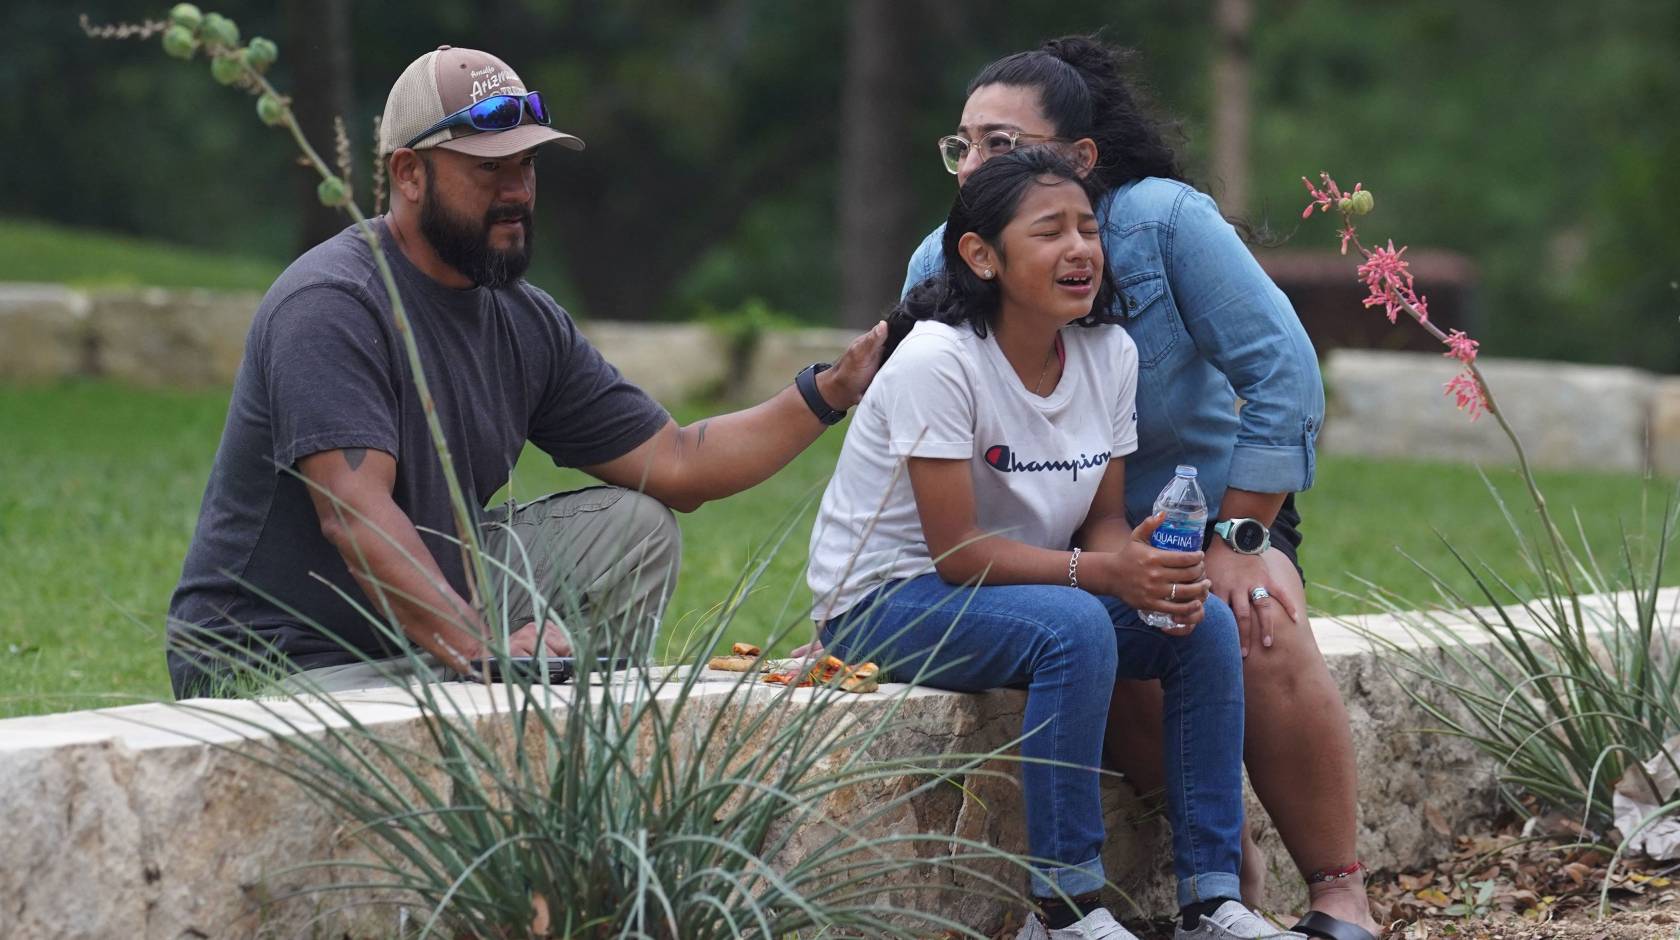 A girl cries outside the Willie de Leon Civic Center in Uvalde, Texas, on May 24, 2022, surrounded by two adults